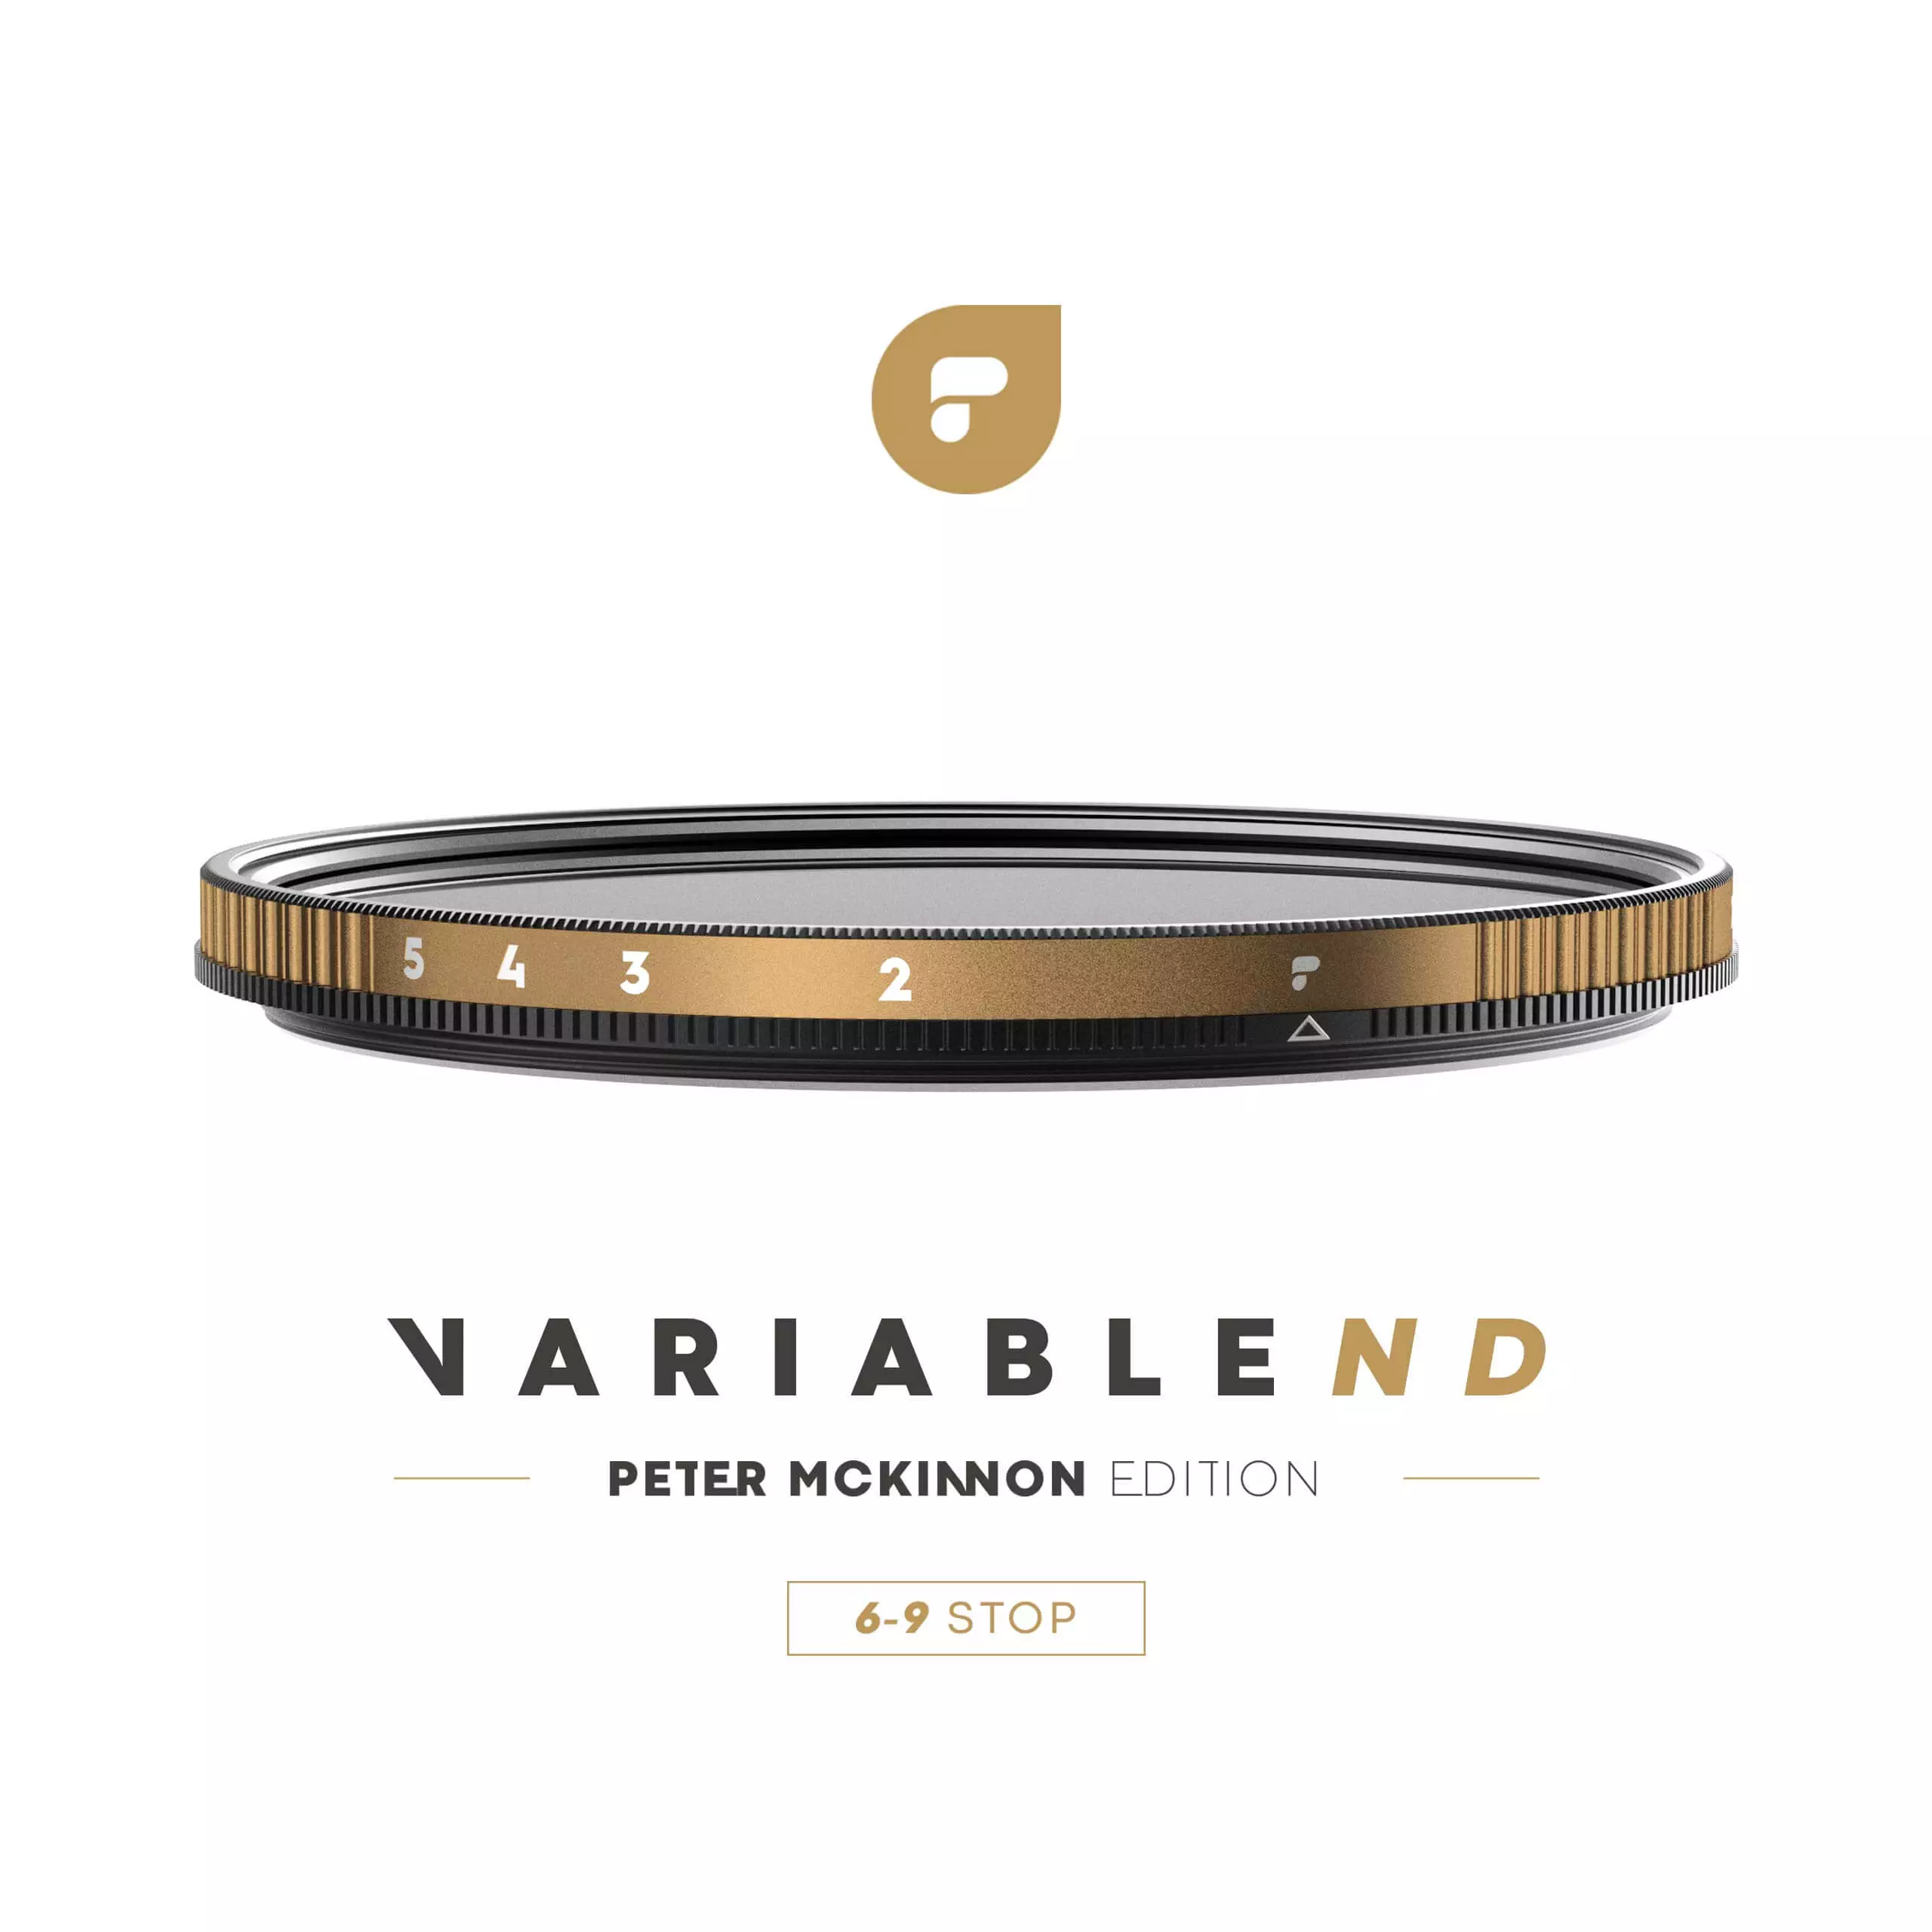 PolarPro 77mm Peter McKinnon Edition Variable Neutral Density 1.8 to 2.7 Filter (6 to 9-Stop)